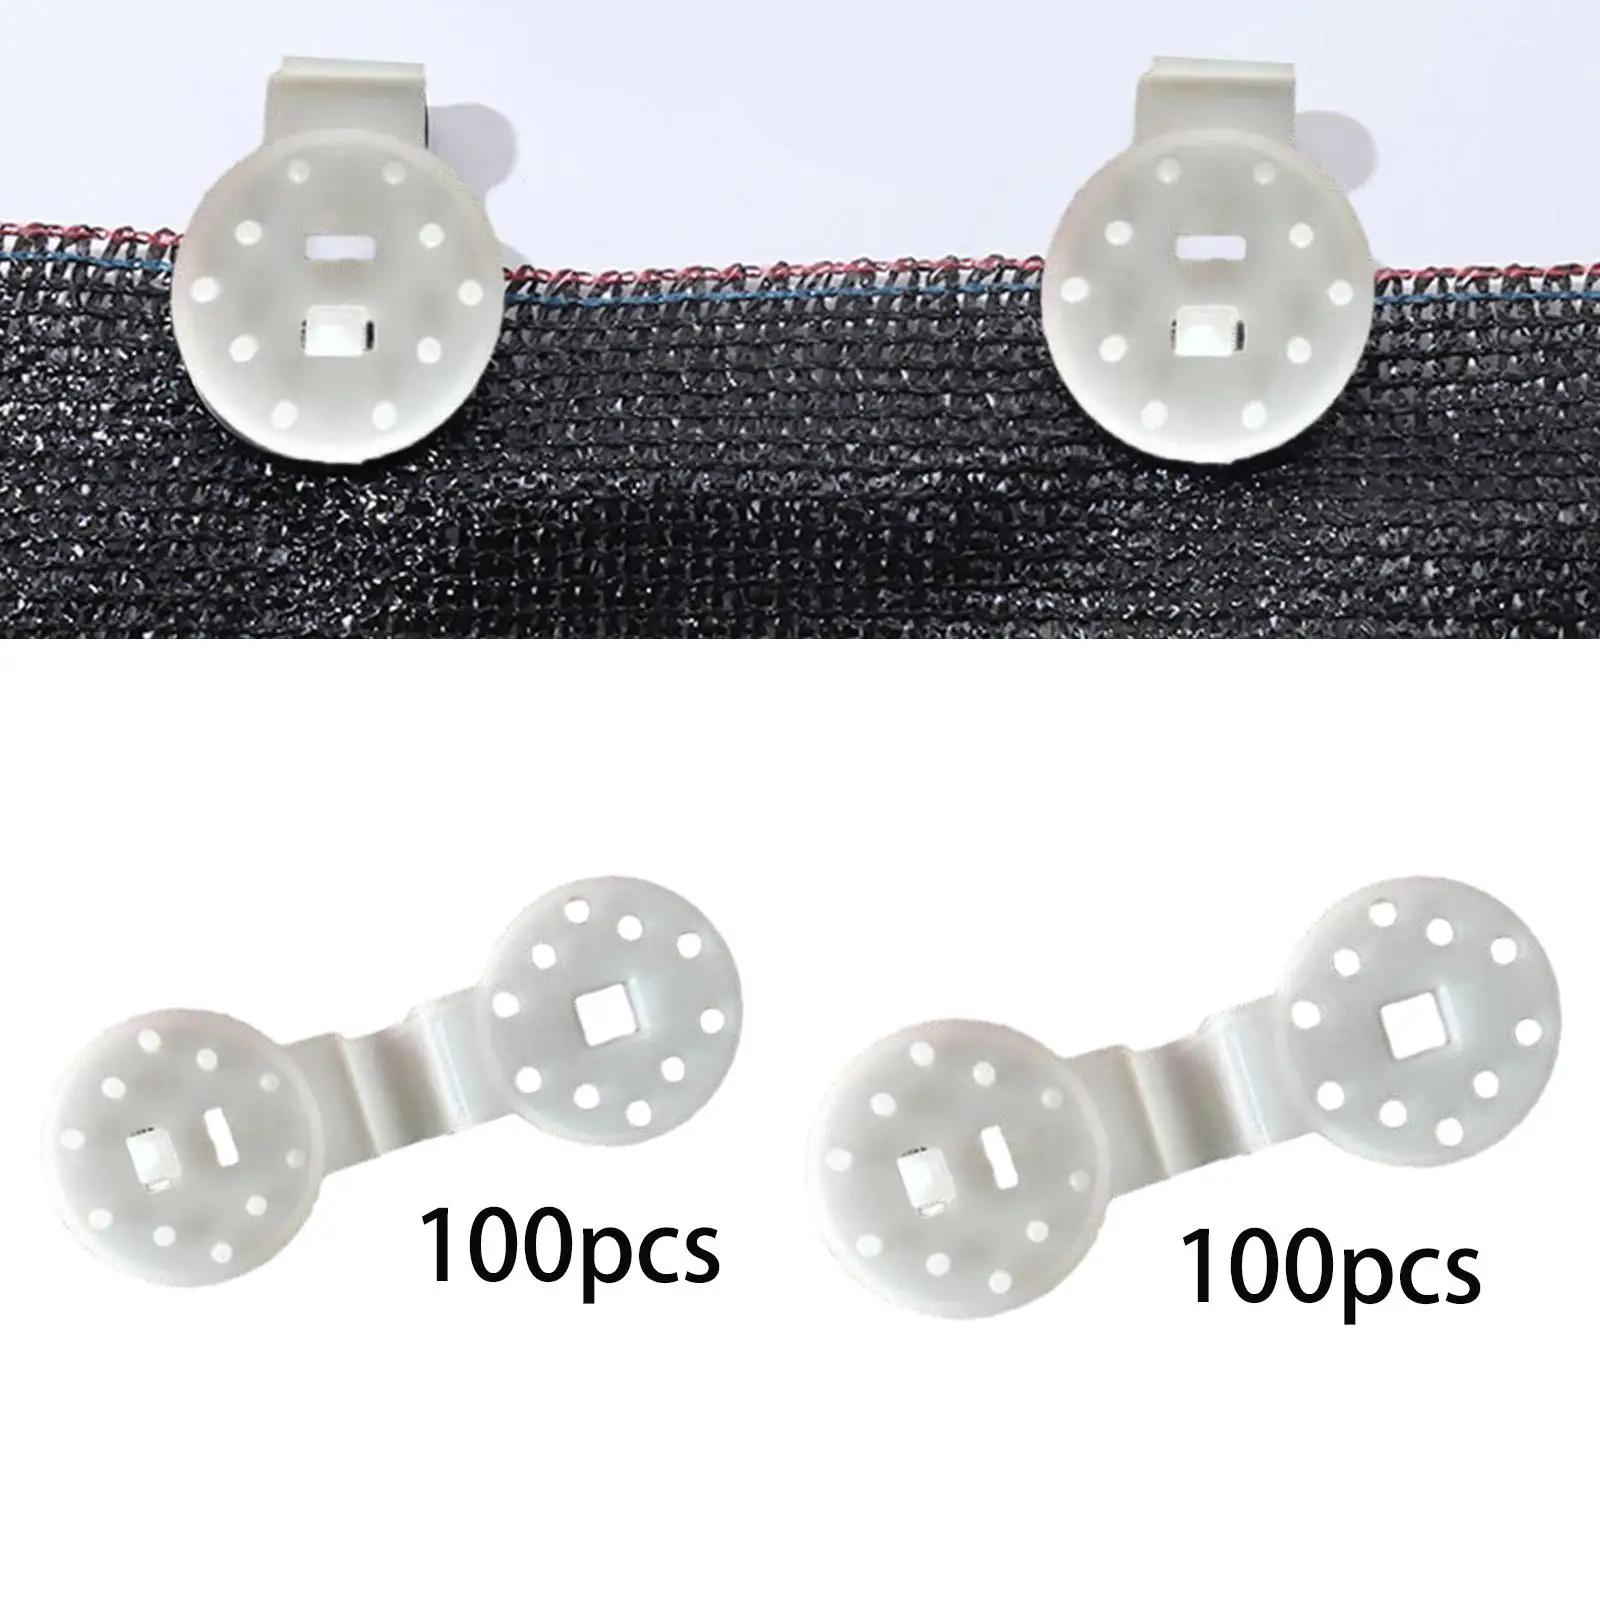 100Pcs Shade Cloth Clips Tightener Shade Net Clips Awning Clamp for Patio Yard Car Cover Shade Net Anti Bird Netting